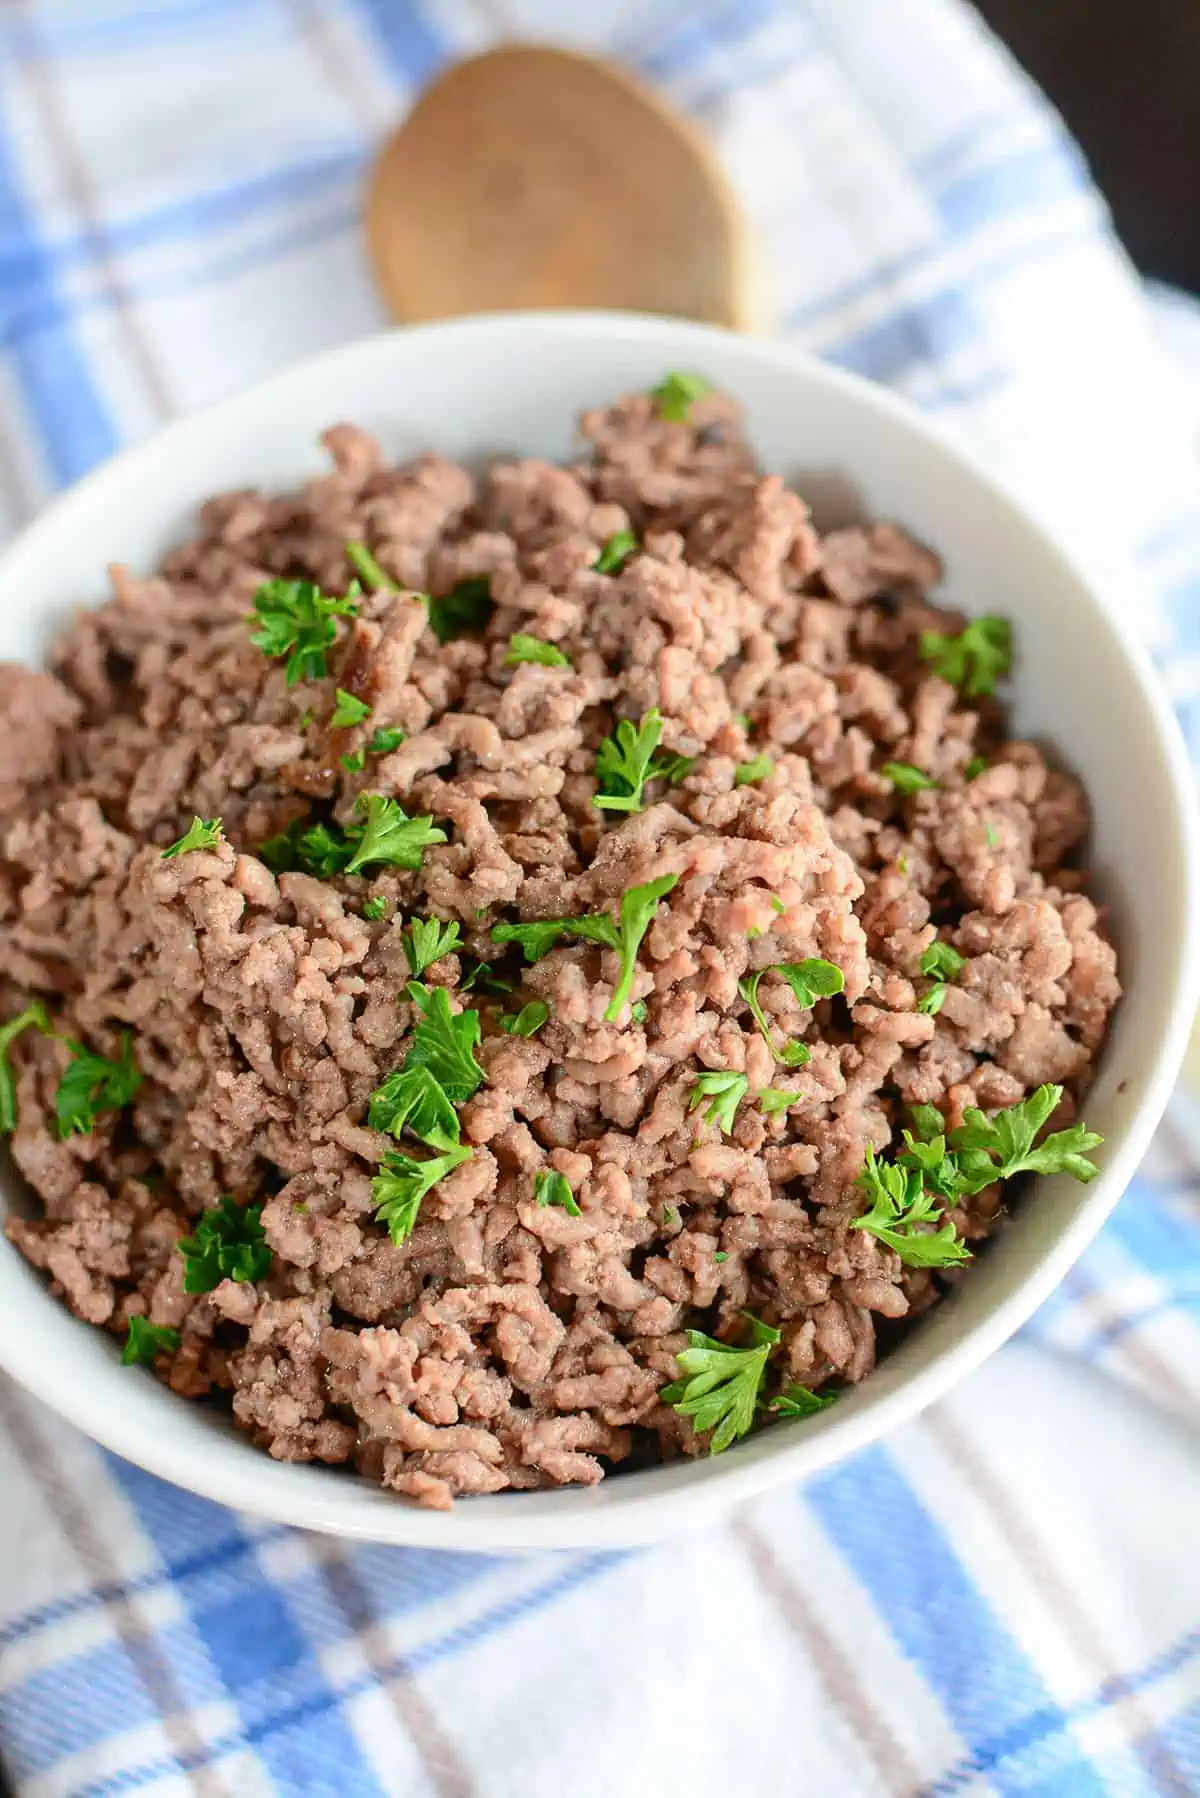 Cooked ground beef in a bowl with fresh parsley sprinkled over the top.